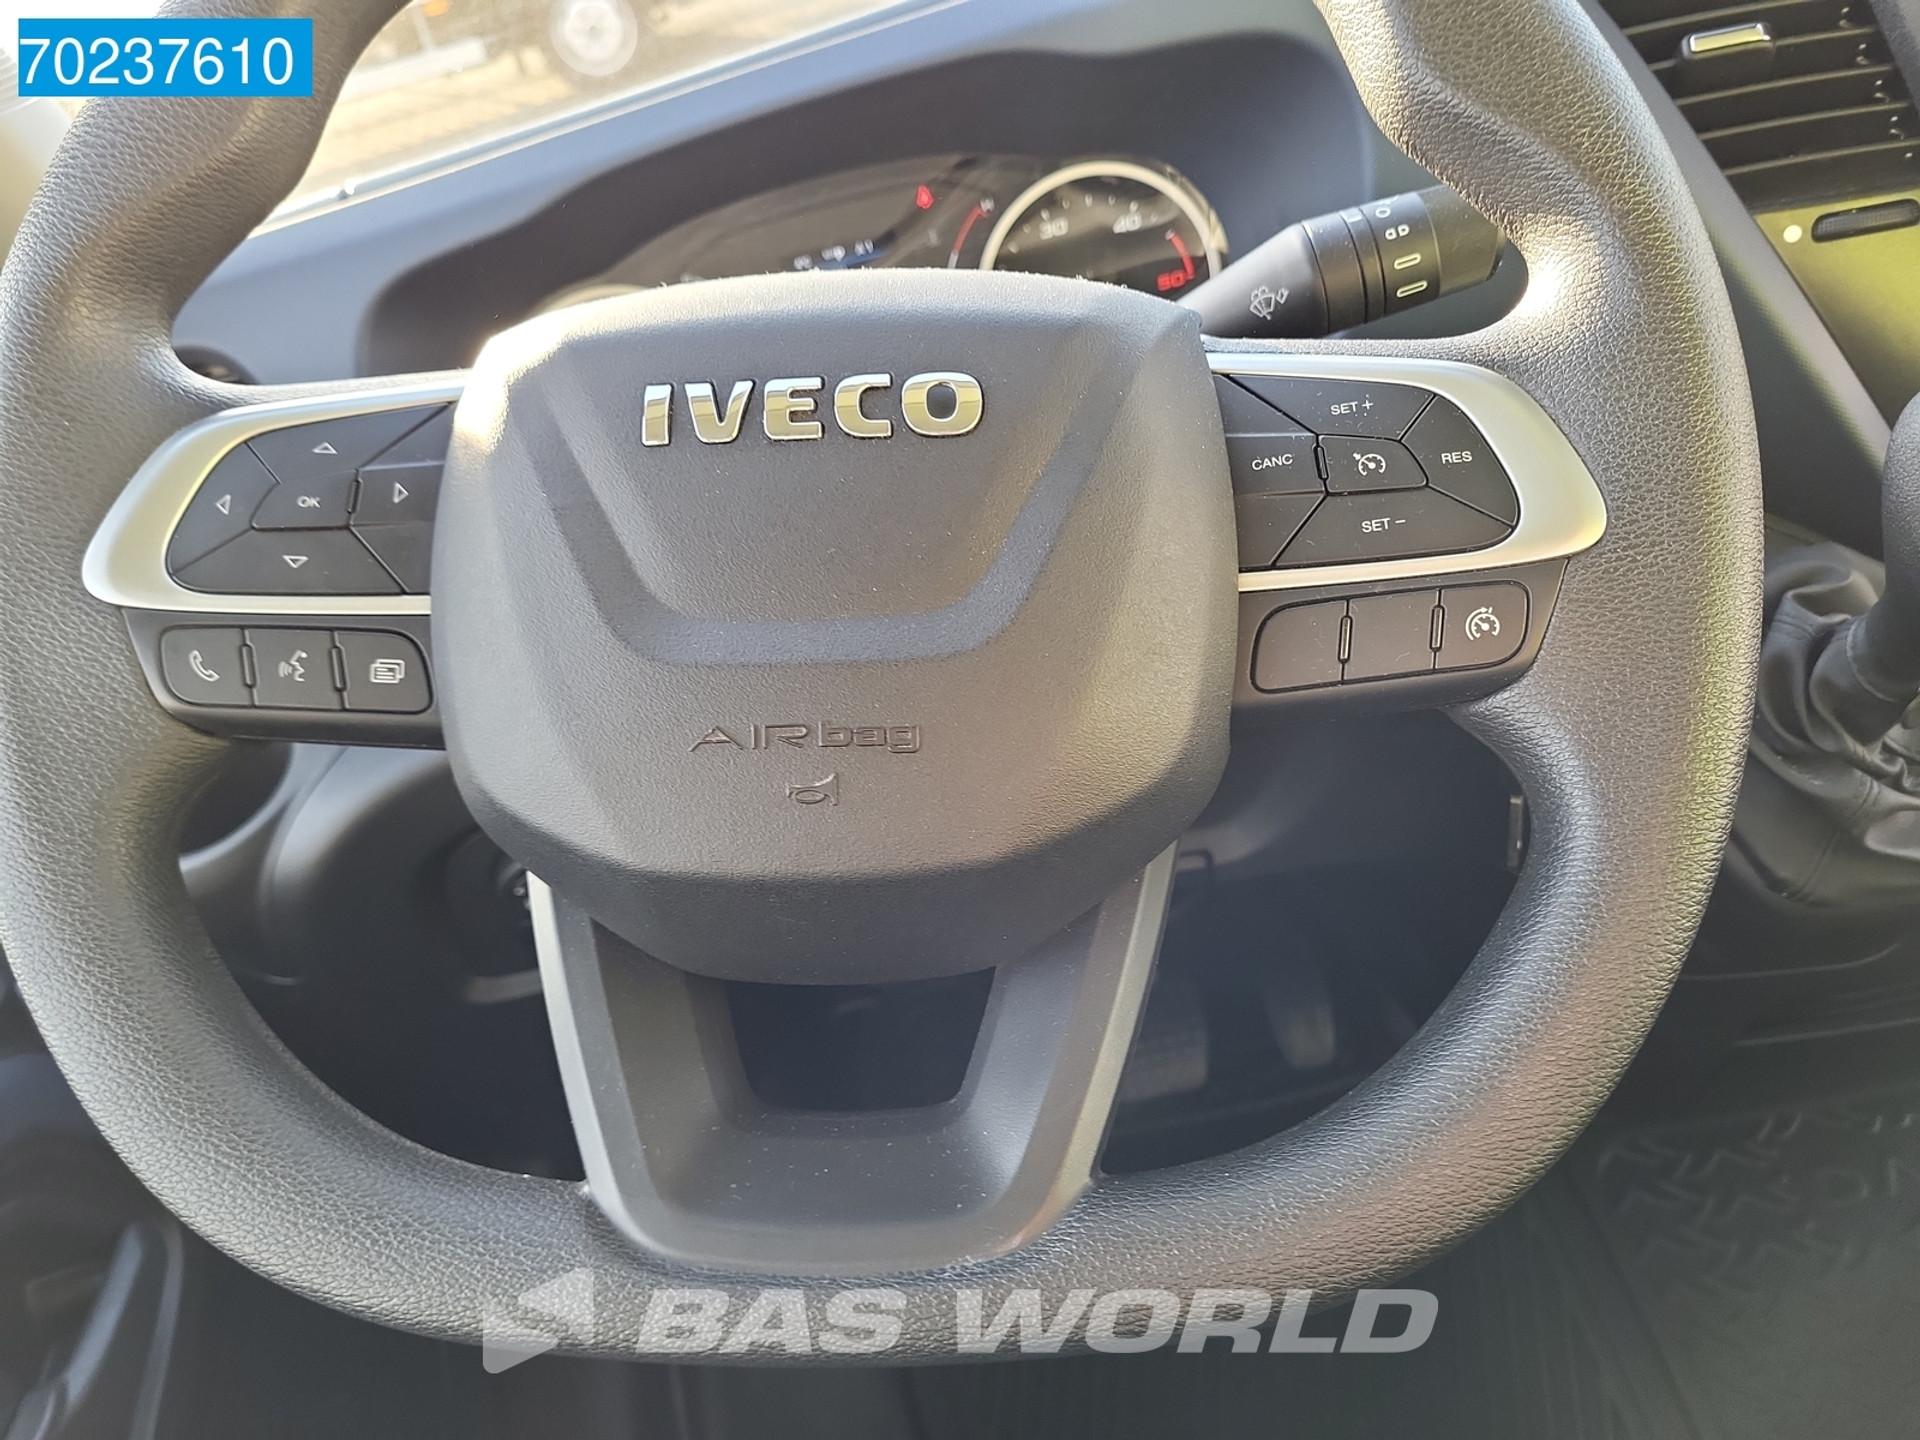 Foto 16 van Iveco Daily 35S14 Automaat L2H2 Airco Cruise Standkachel PDC 12m3 Airco Cruise control